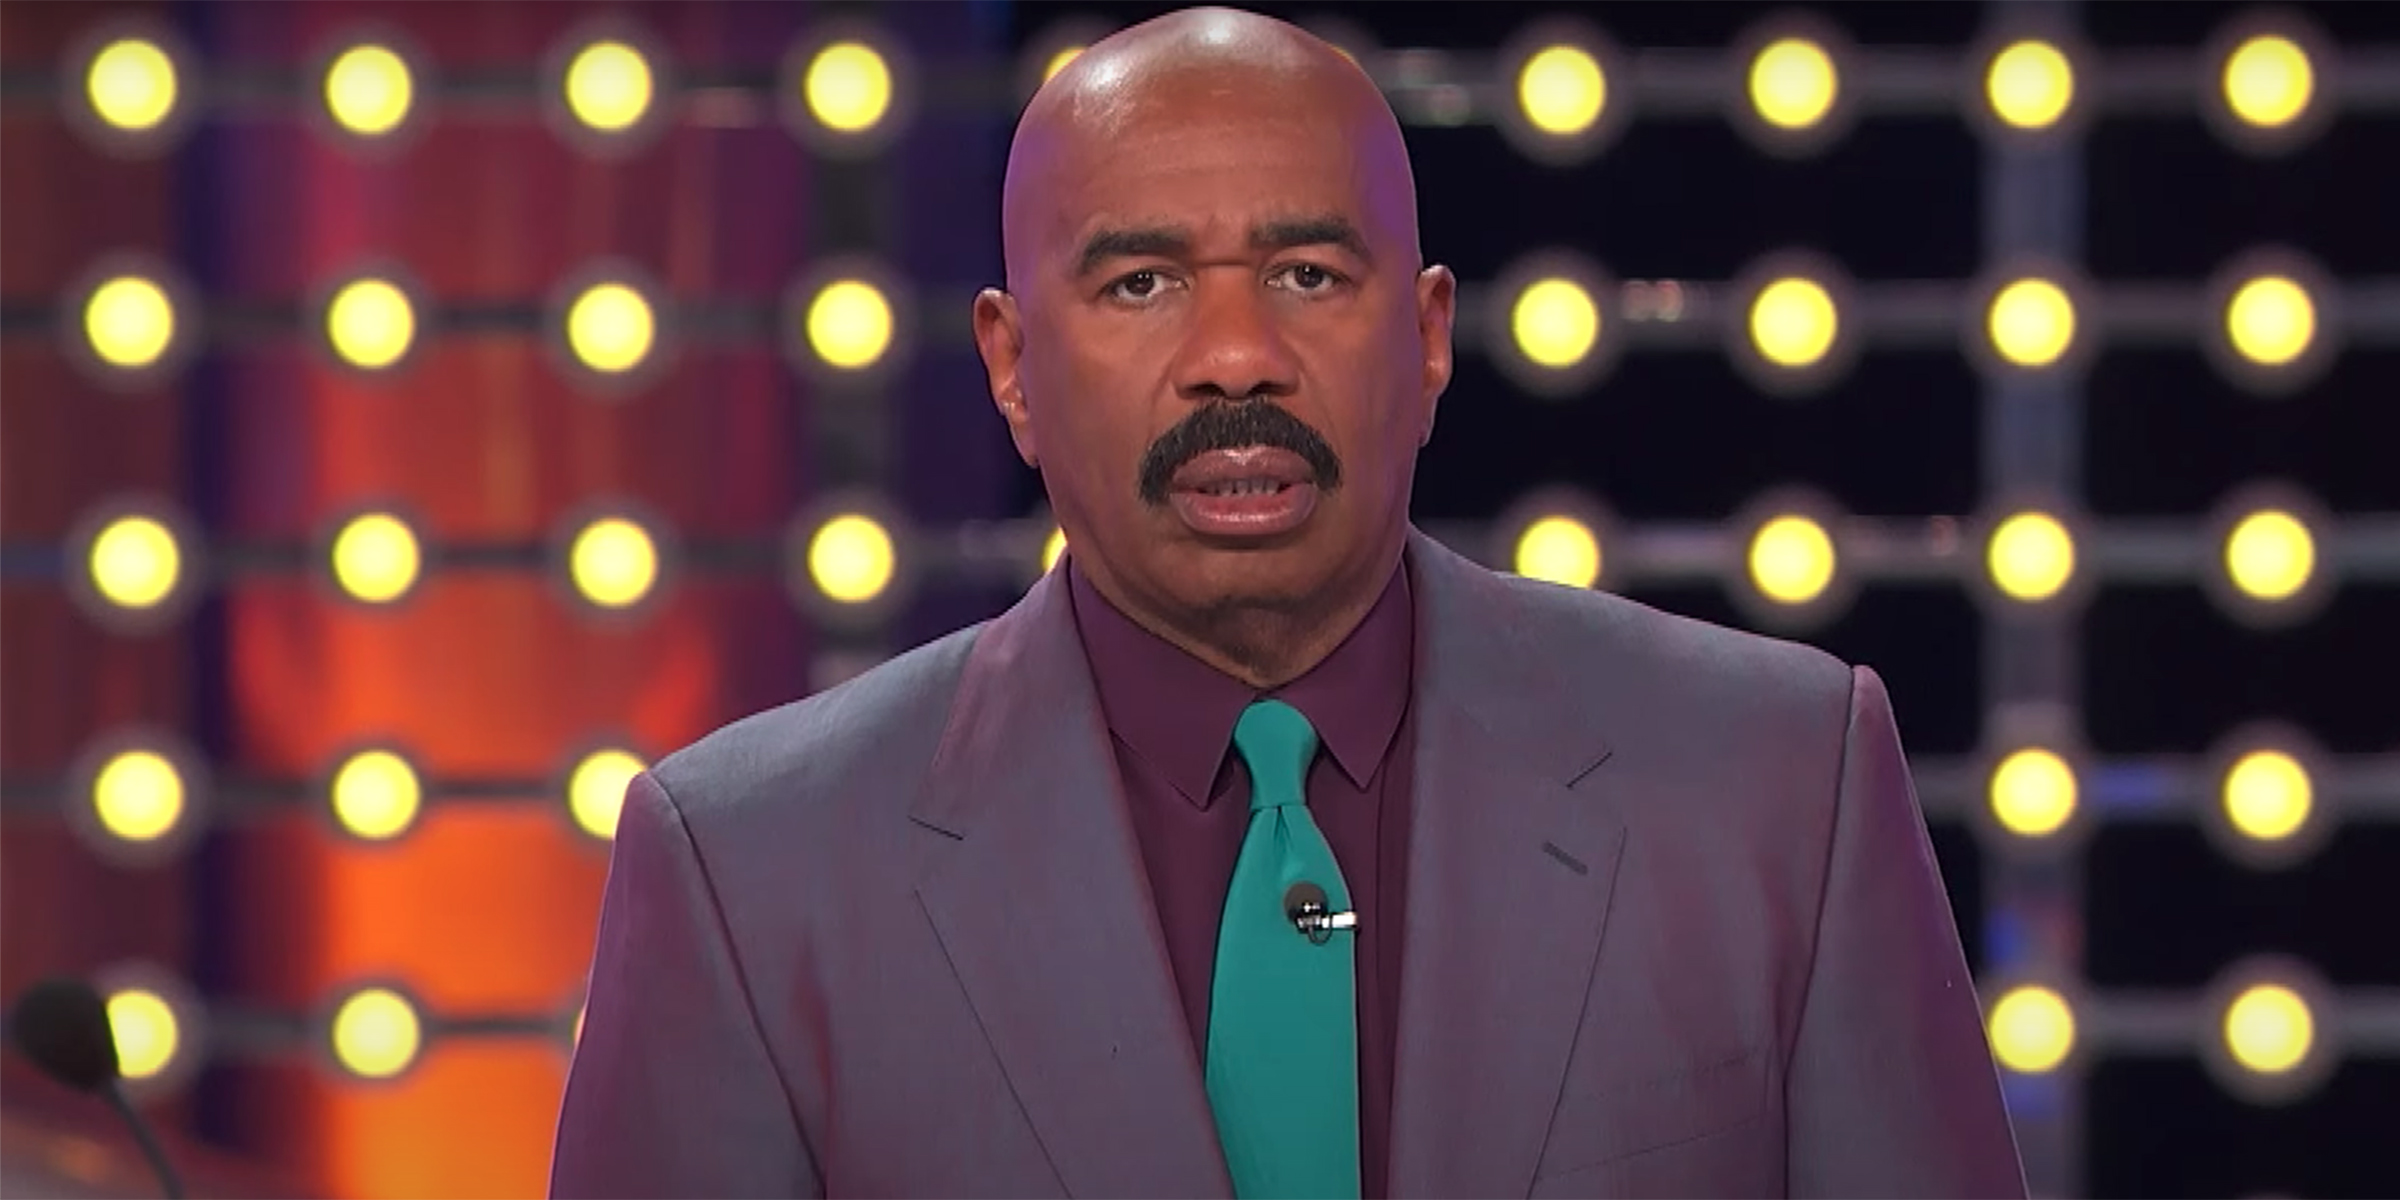 Steve Harvey Being Cancelled For Remarks About Women.